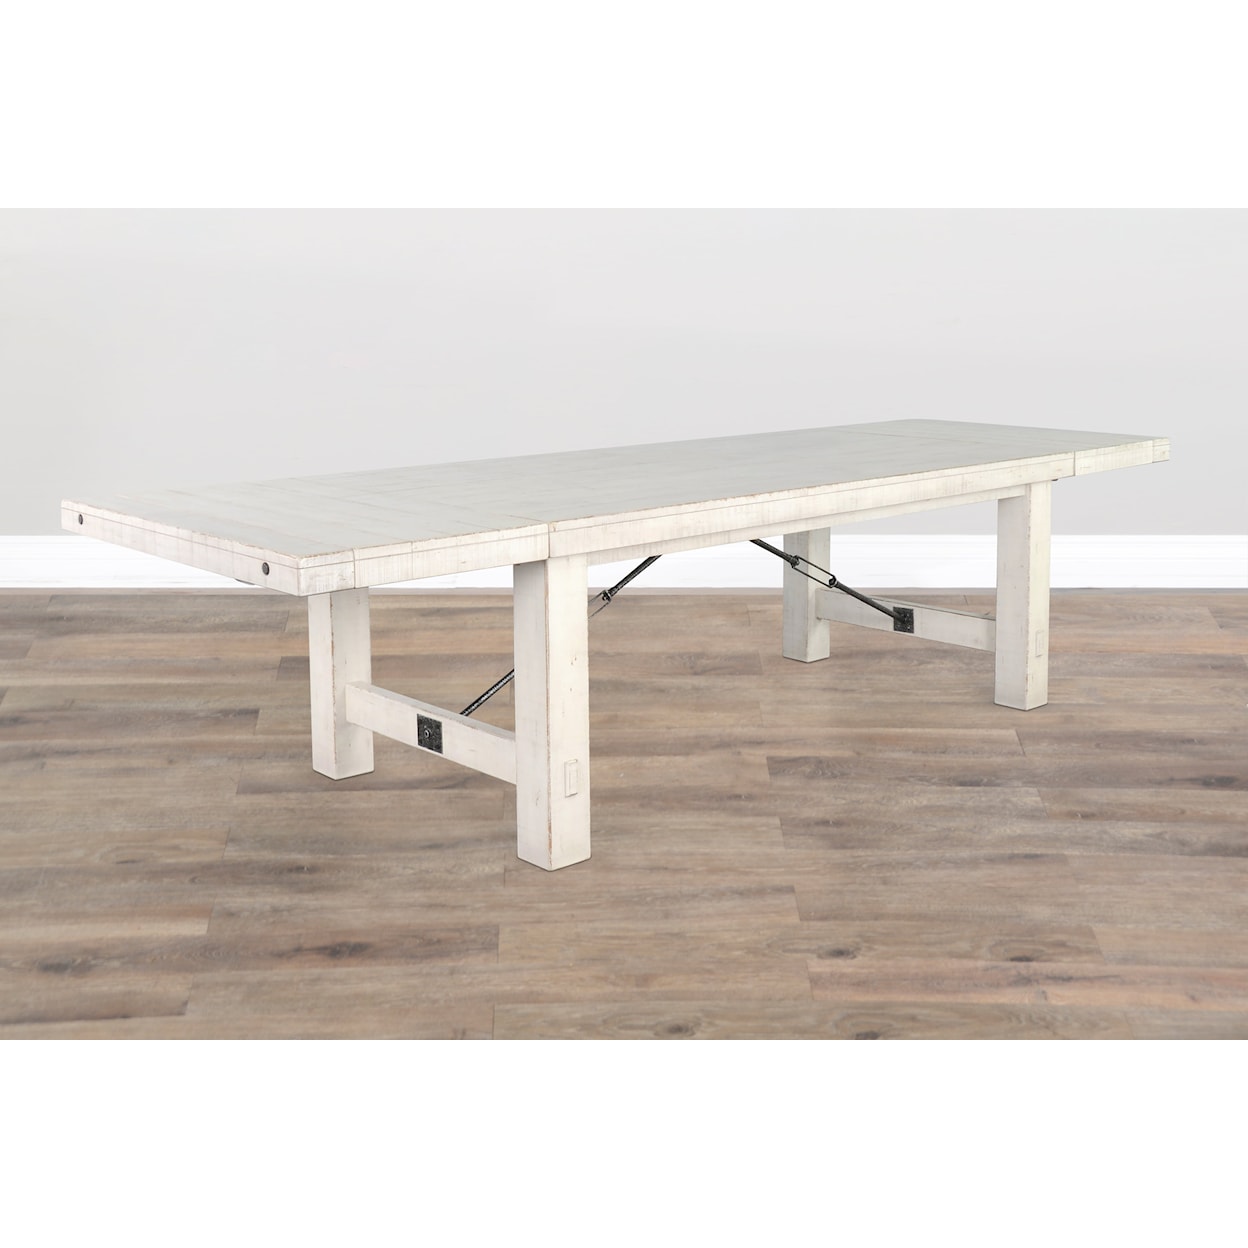 Sunny Designs Marina White Sand Extension Table